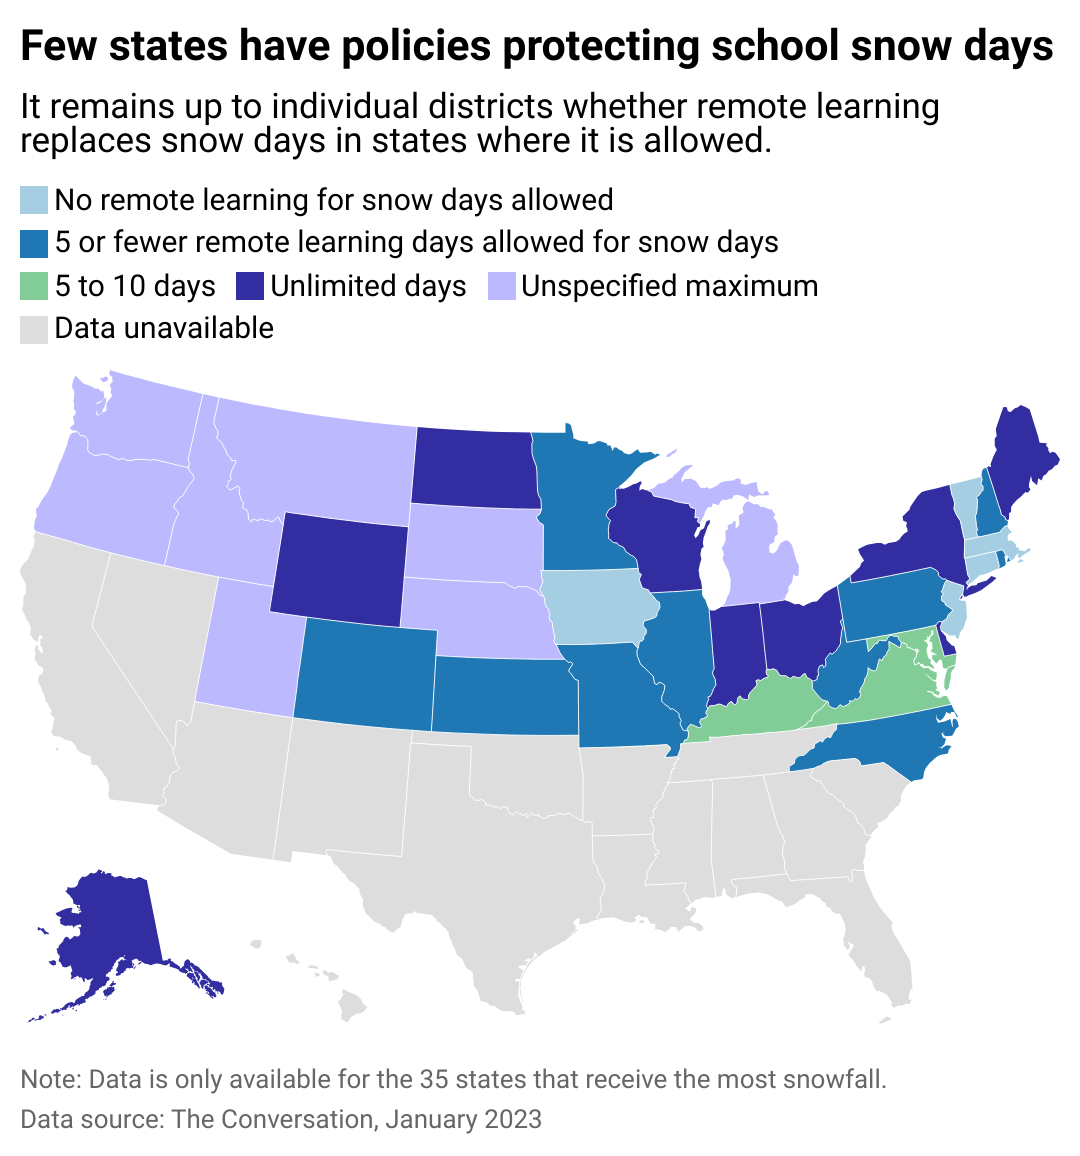 State map showing few states have policies protecting school snow days, including Massachusetts, New Jersey, Iowa, Vermont, and Connecticut. In states where replacing snow days with remote learning is allowed, it remains up to individual districts to make the call.